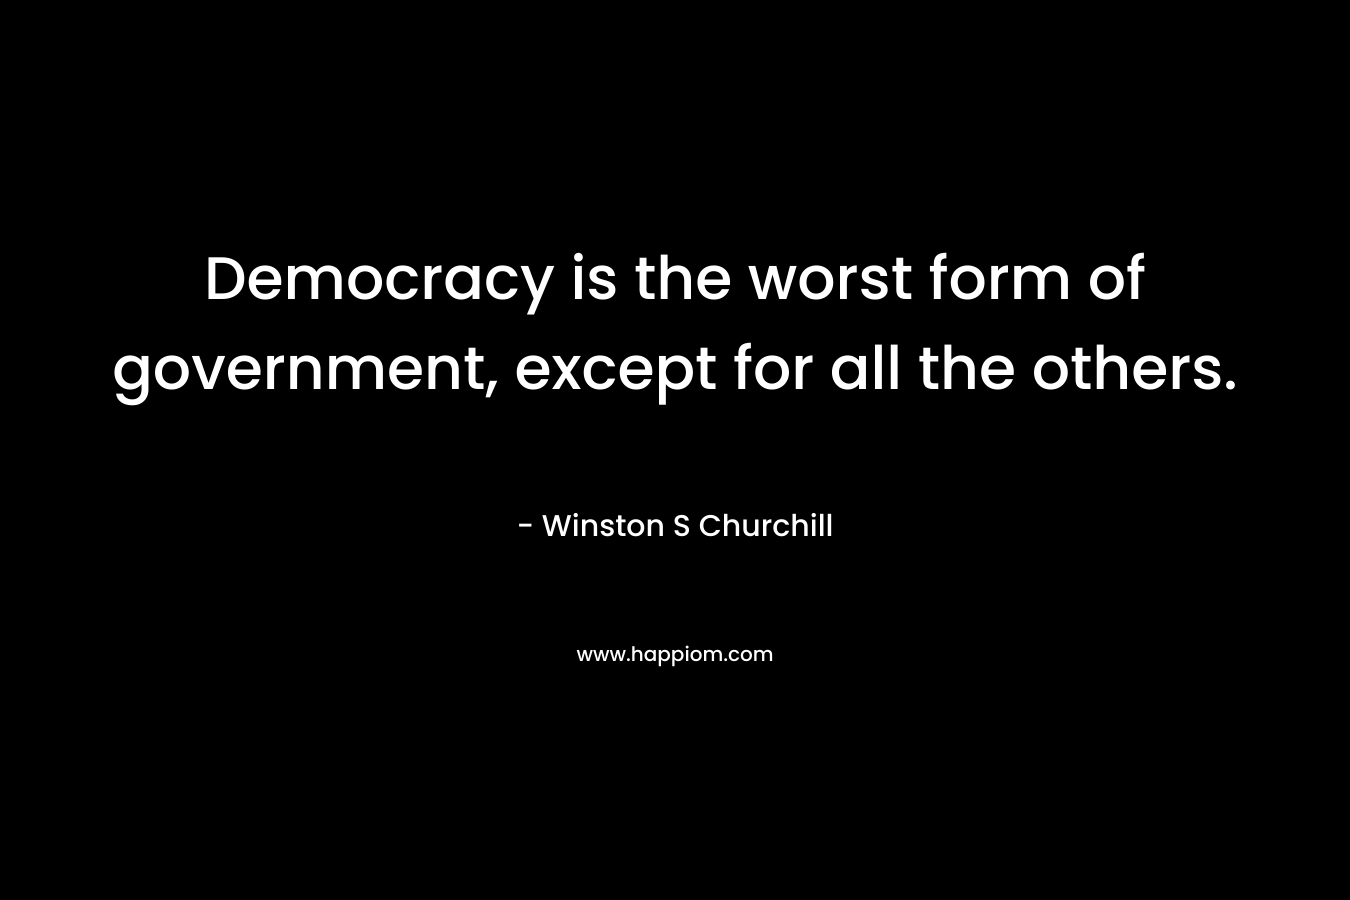 Democracy is the worst form of government, except for all the others.